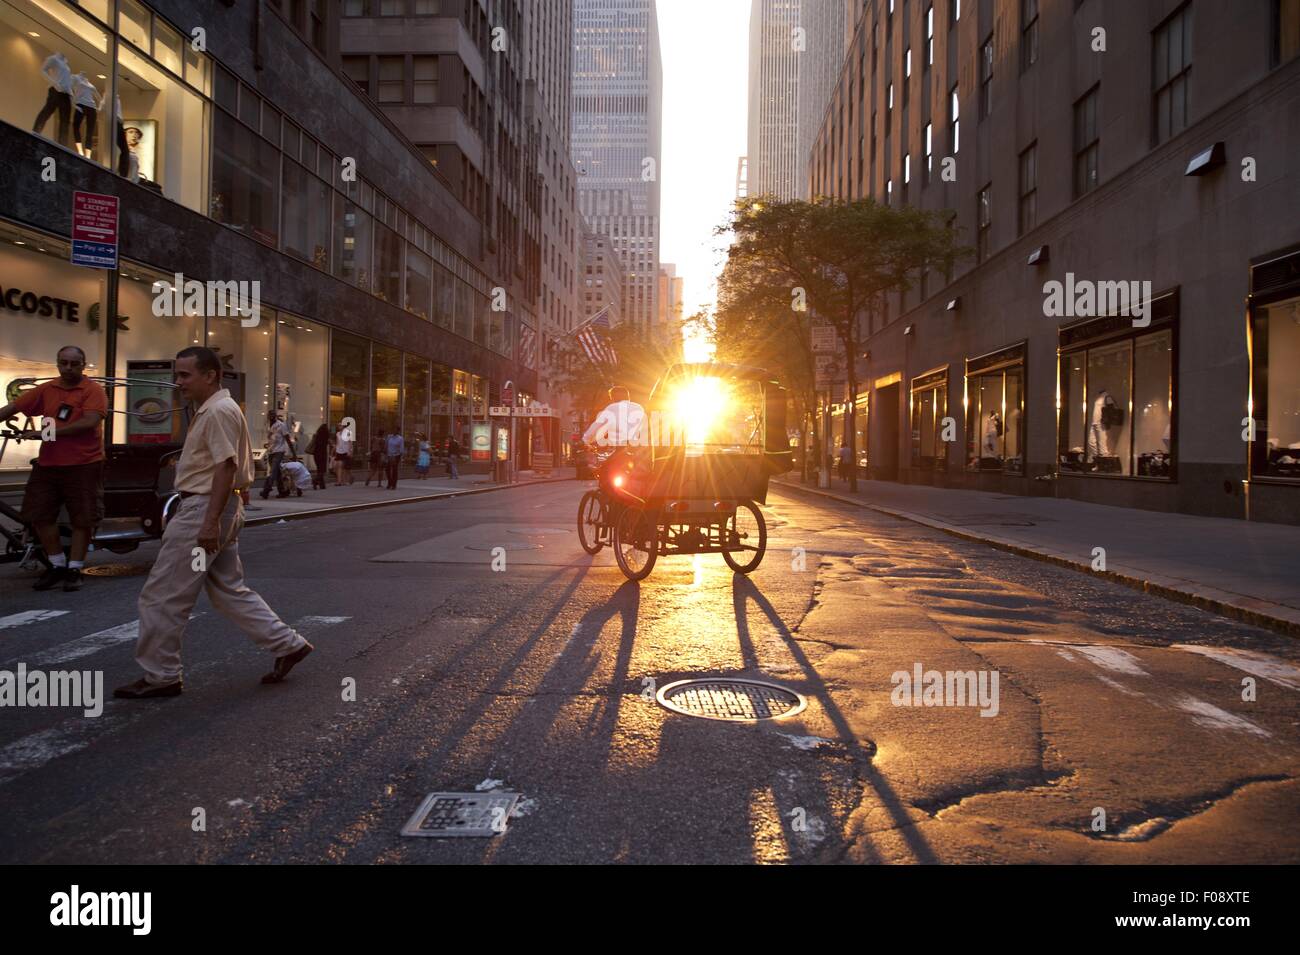 Horse carriage on street with people at sunset in New York, USA Stock Photo